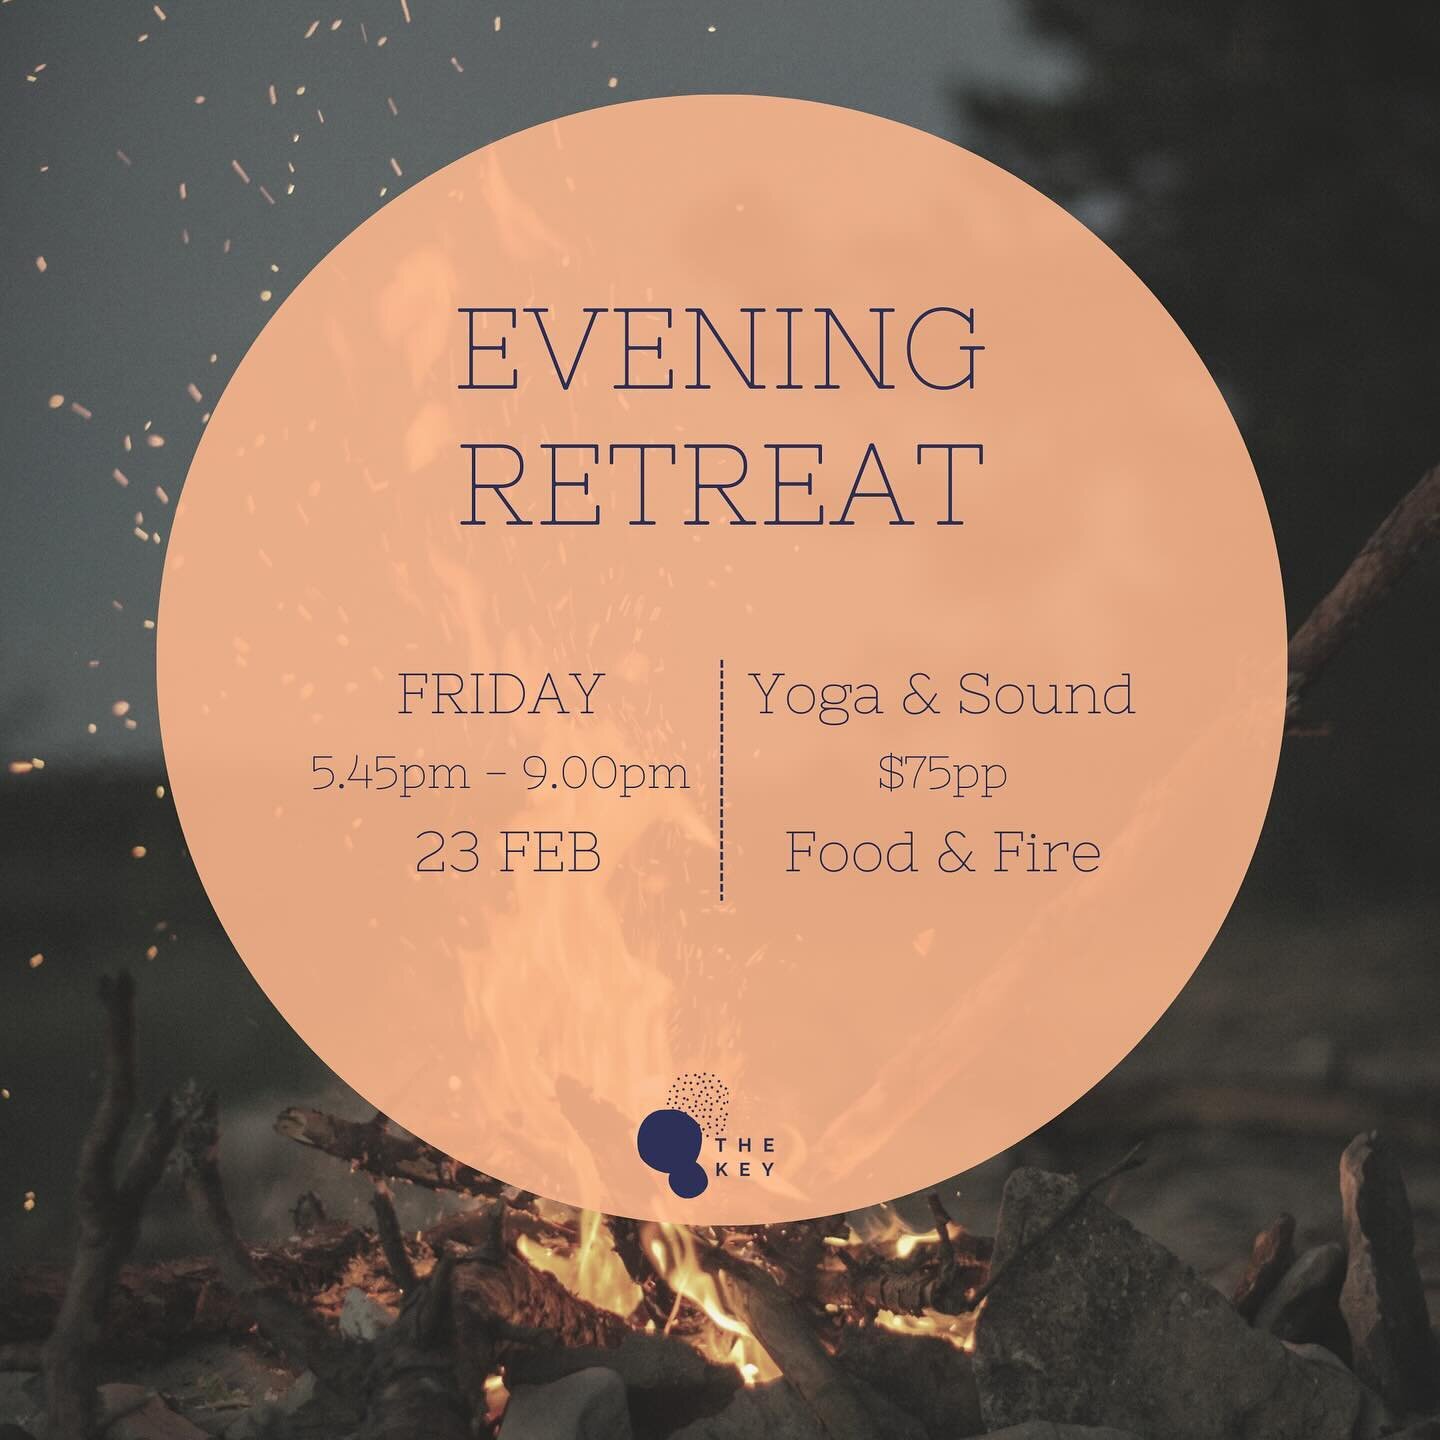 An evening harnessing the energy of the full moon to release what no longer serves us and to make room for new beginnings. 

To give your body and mind space to rest, restore and reset.

You'll be lead through a slow flow yoga practice. landing into 